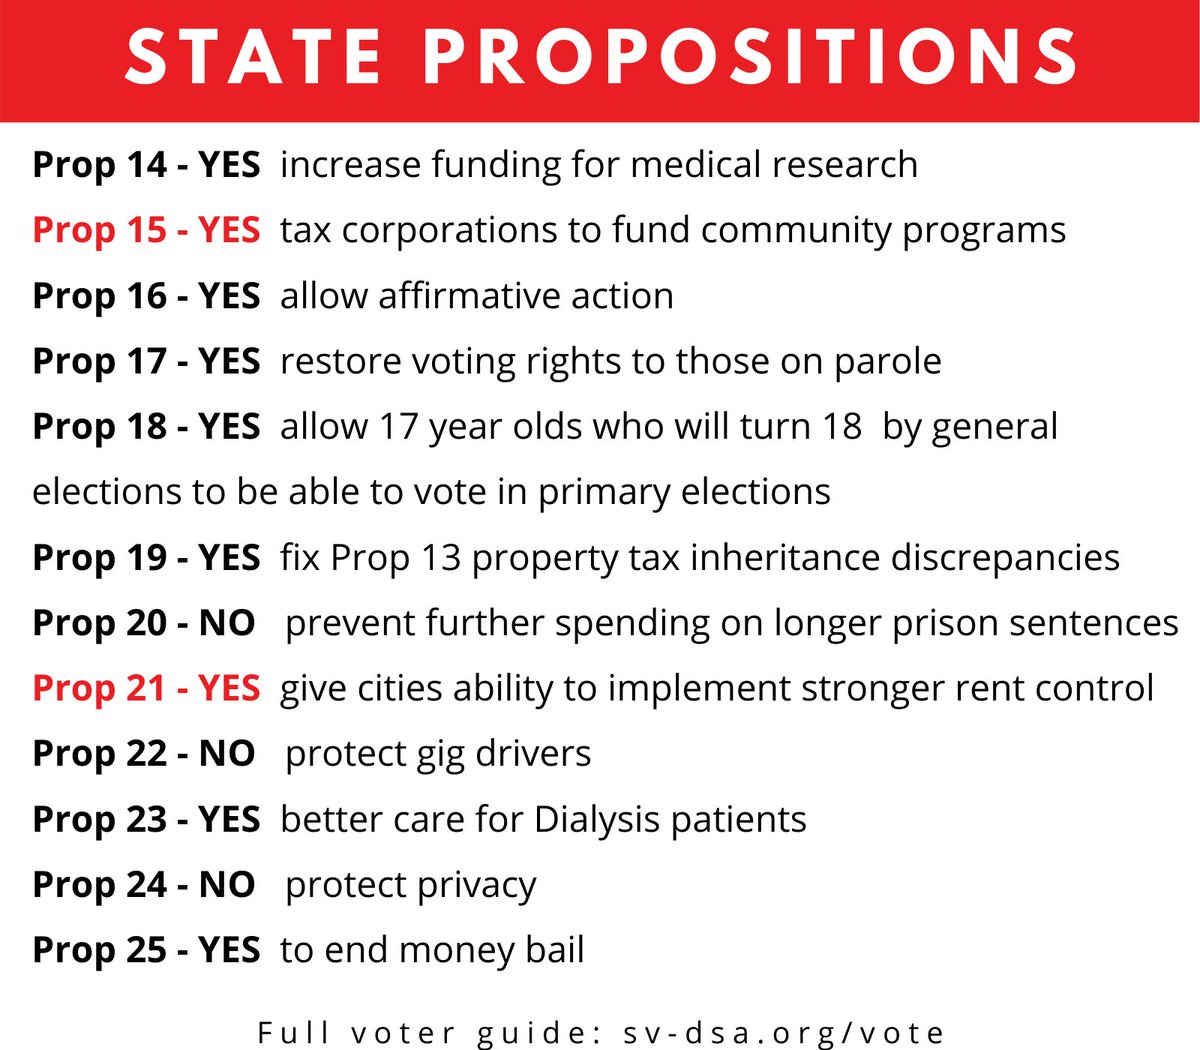 We are endorsing state and local ballot measures: YES on Prop 15. Tax corporate property! YES on Prop 21. Let cities expand rent control! NO on Measure C, Mtn View - Stop the RV Ban! YES on Measure RR - Save Caltrain!